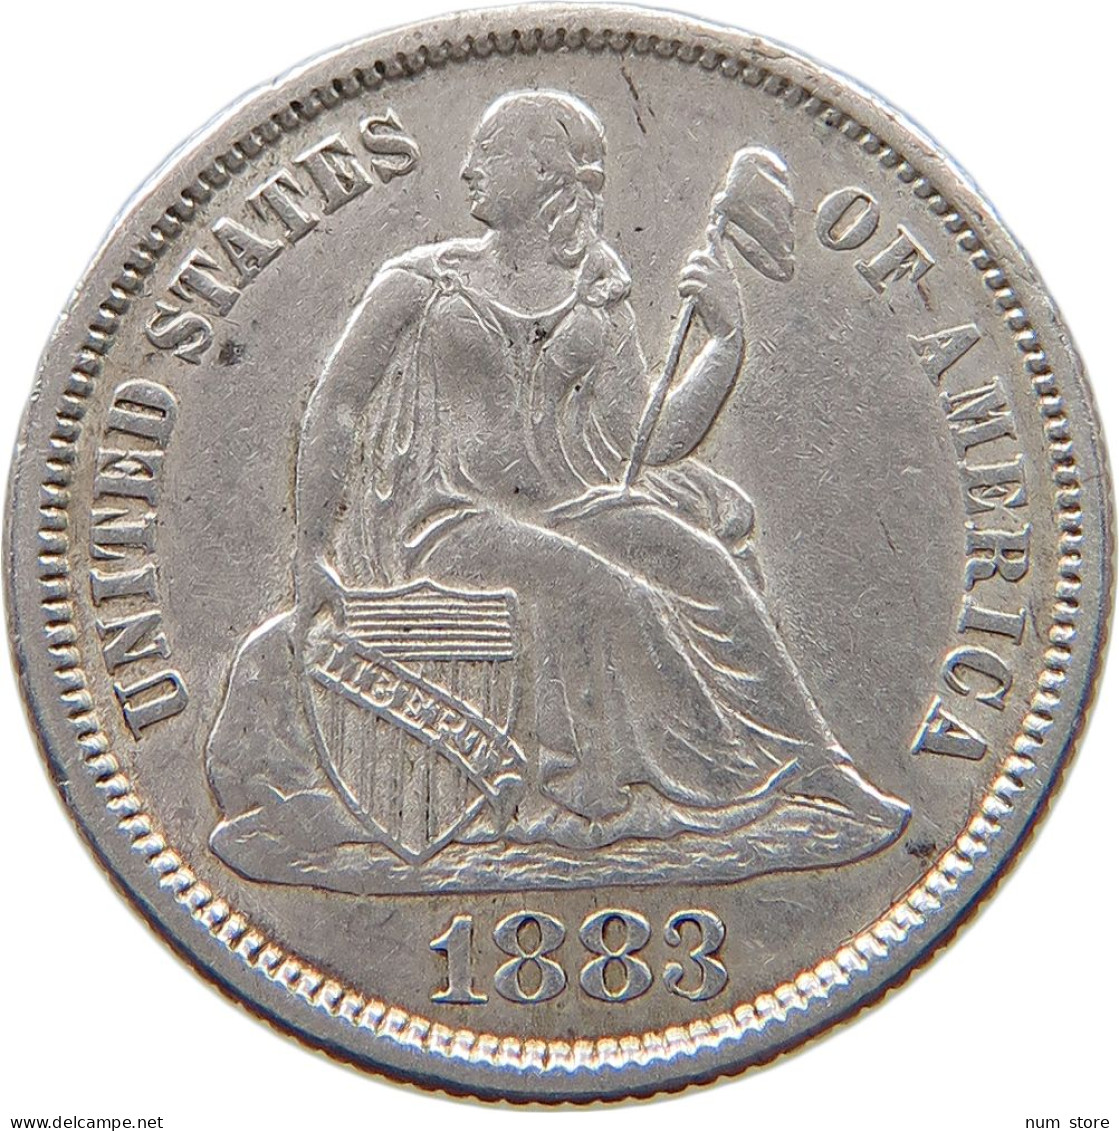 UNITED STATES OF AMERICA DIME 1883 SEATED LIBERTY #t121 0259 - 1837-1891: Seated Liberty